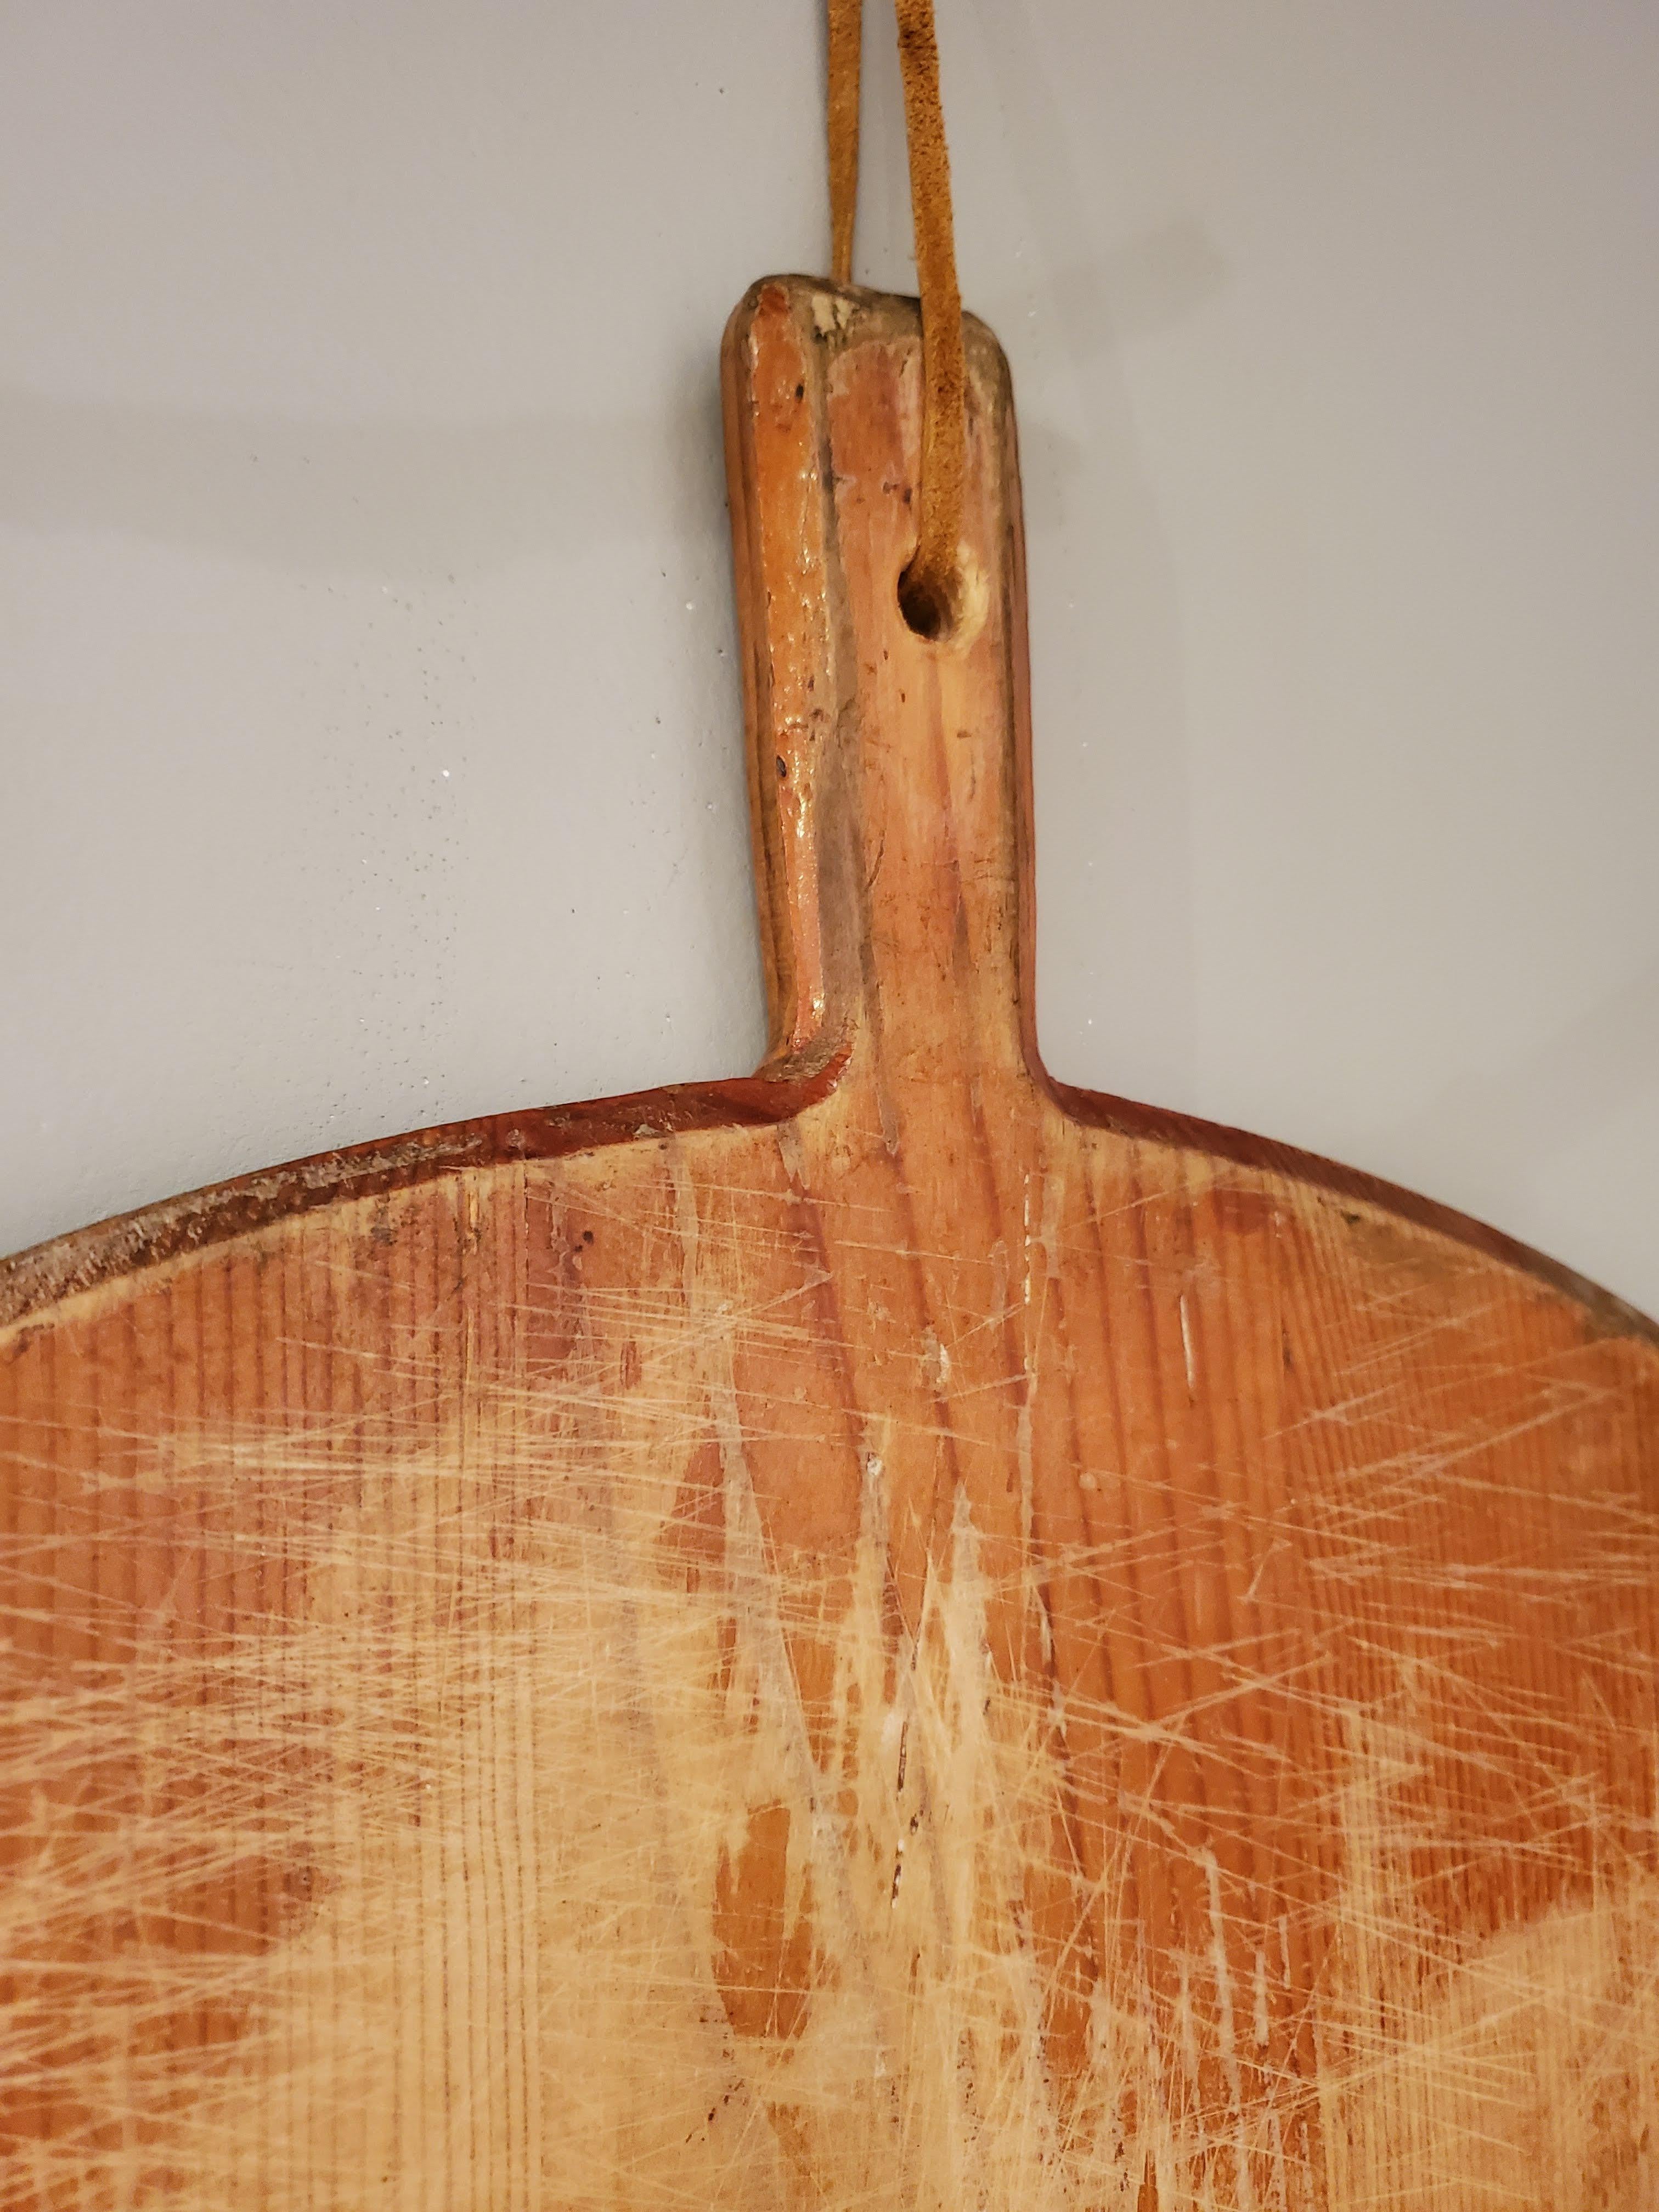 This unusually large 19th century Turkish bread board is a great accessory for your kitchen wall or you can use it for your large party cooking needs. A great quirky piece for those who love to cook. Made of red pine. 
Turkey, circa 1890.